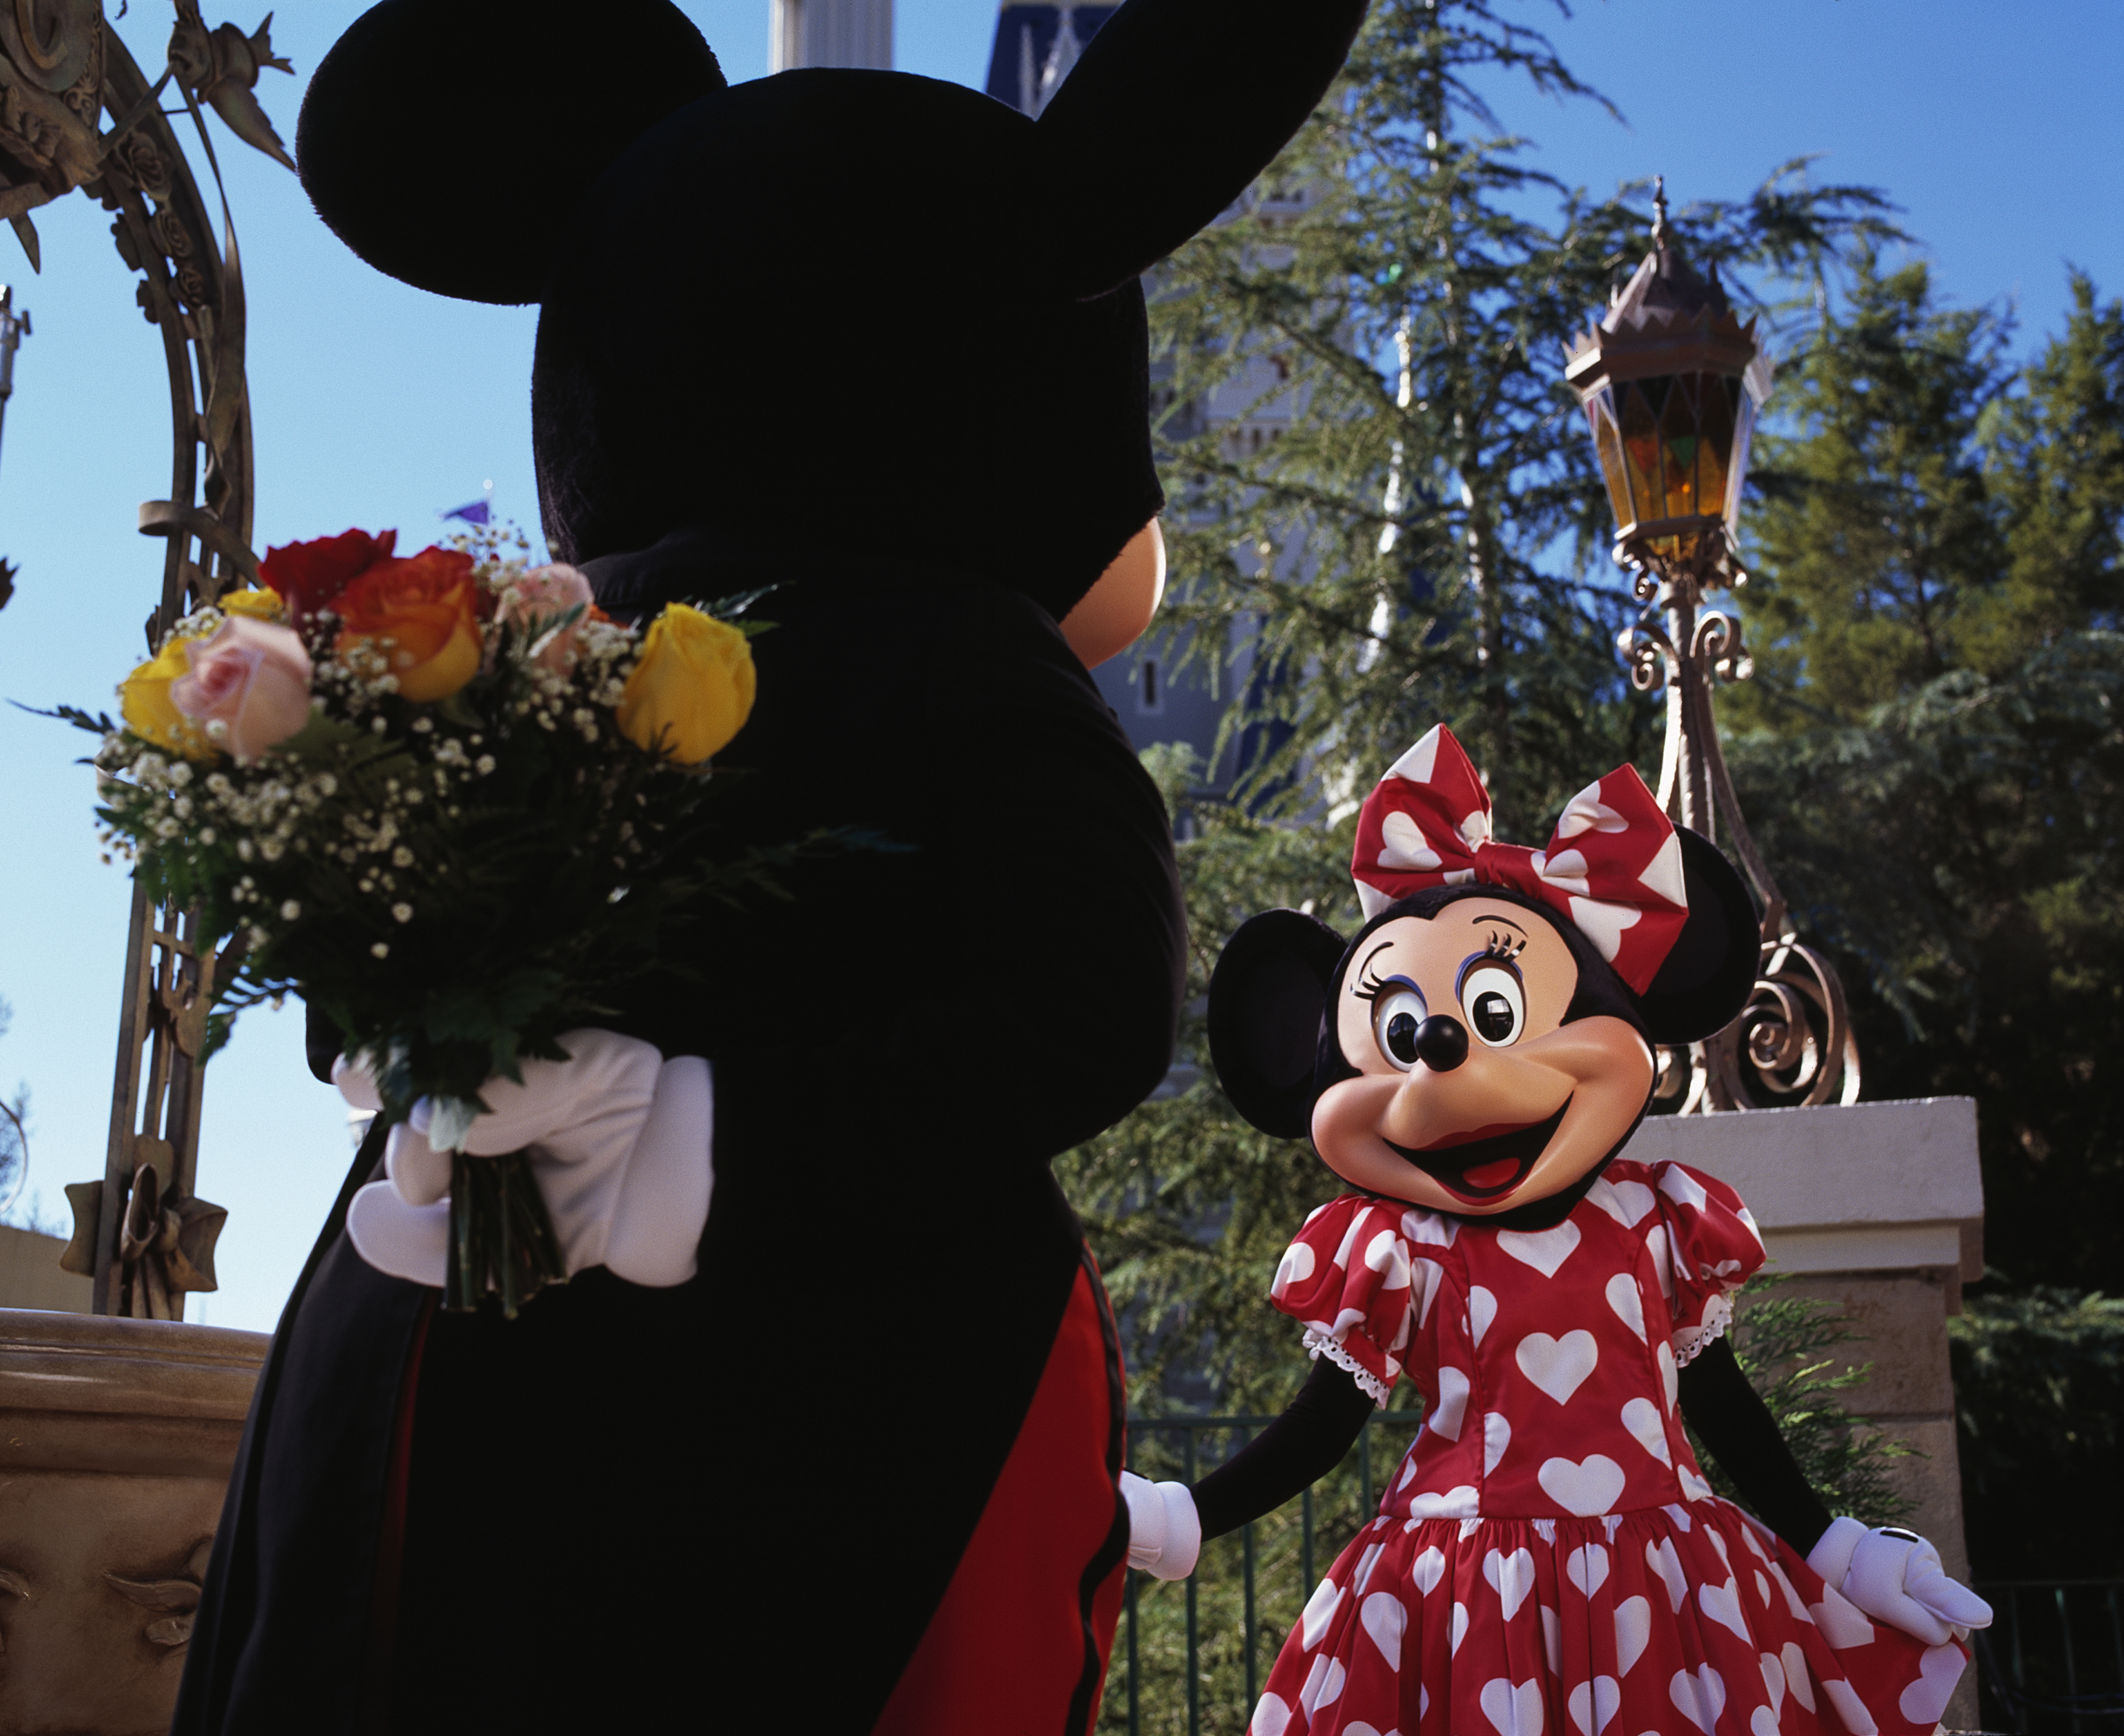 Mickey hiding flowers to give to Minnie